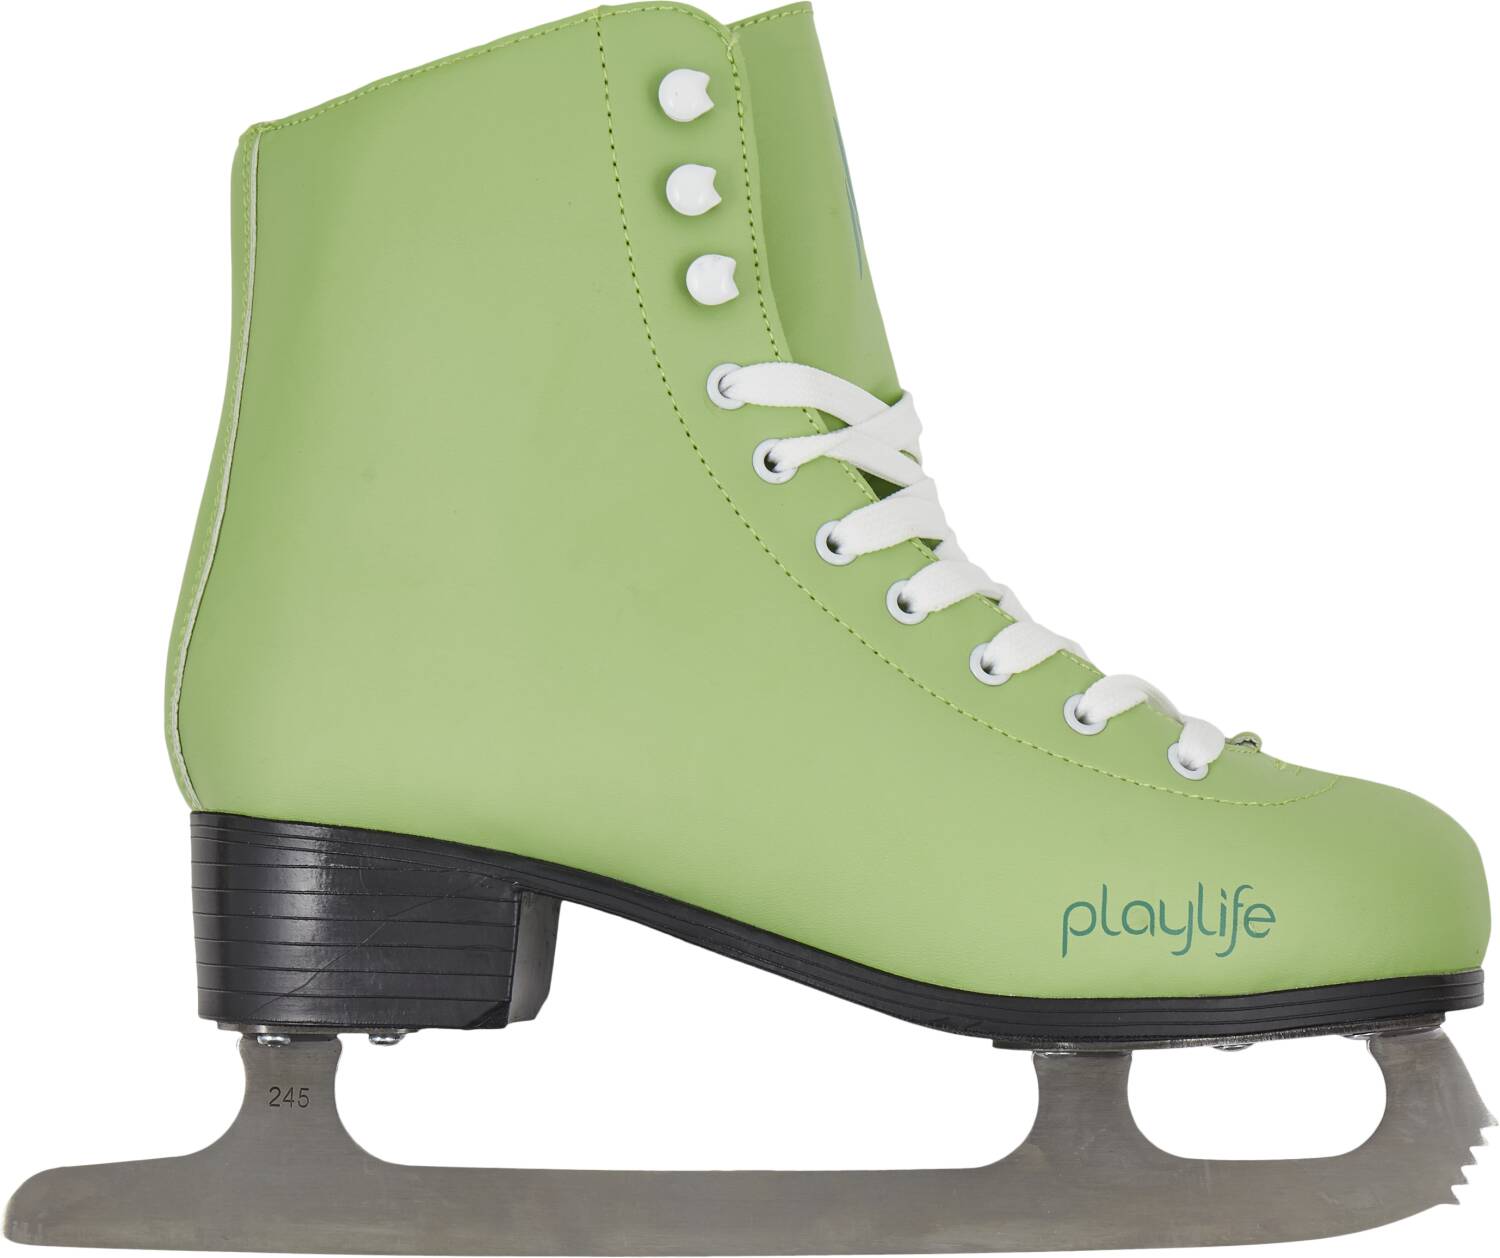 Playlife Classic Figure Skates - Size 39 or 40 Only - Sale